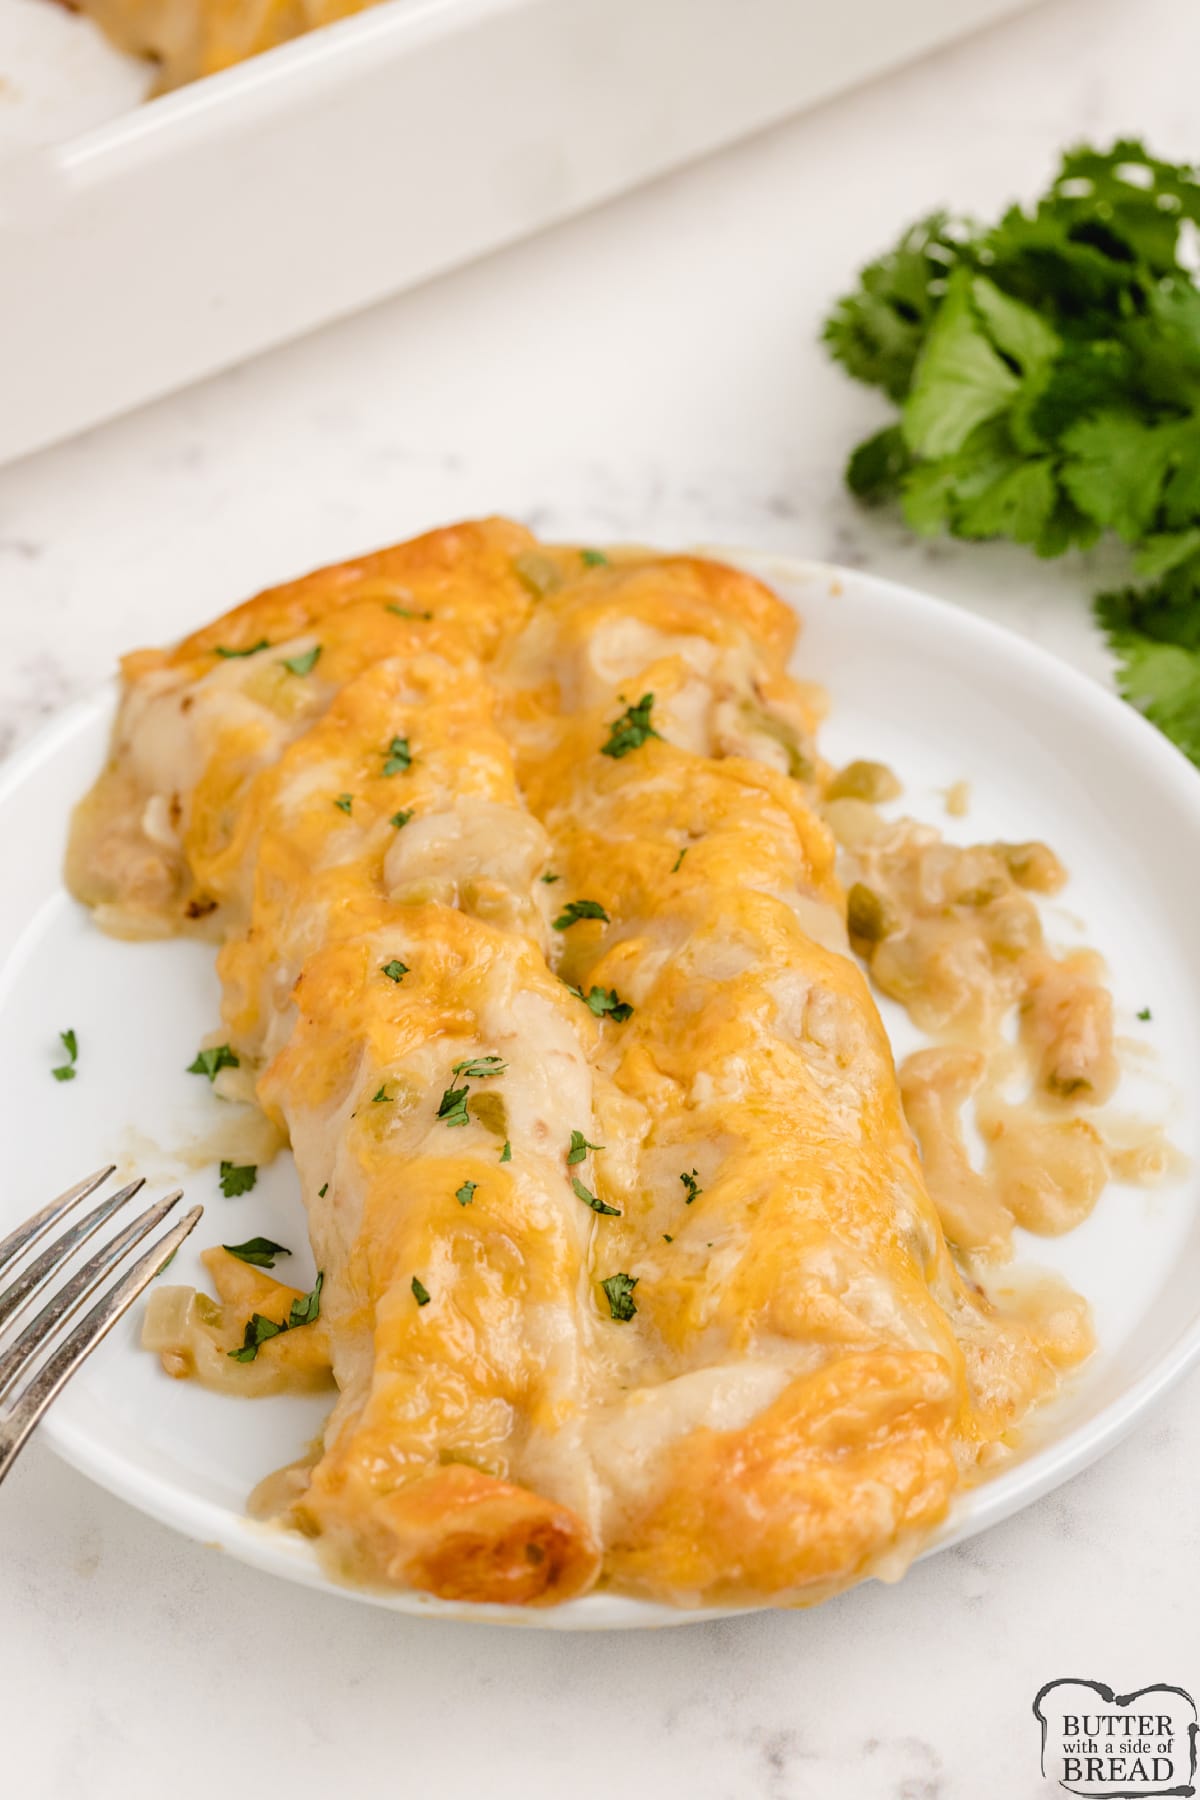 Easy Chicken Enchiladas made completely from scratch with rotisserie chicken for a quick and simple dinner recipe. Our favorite chicken enchilada recipe that is packed with protein and low in fat and carbs too! 